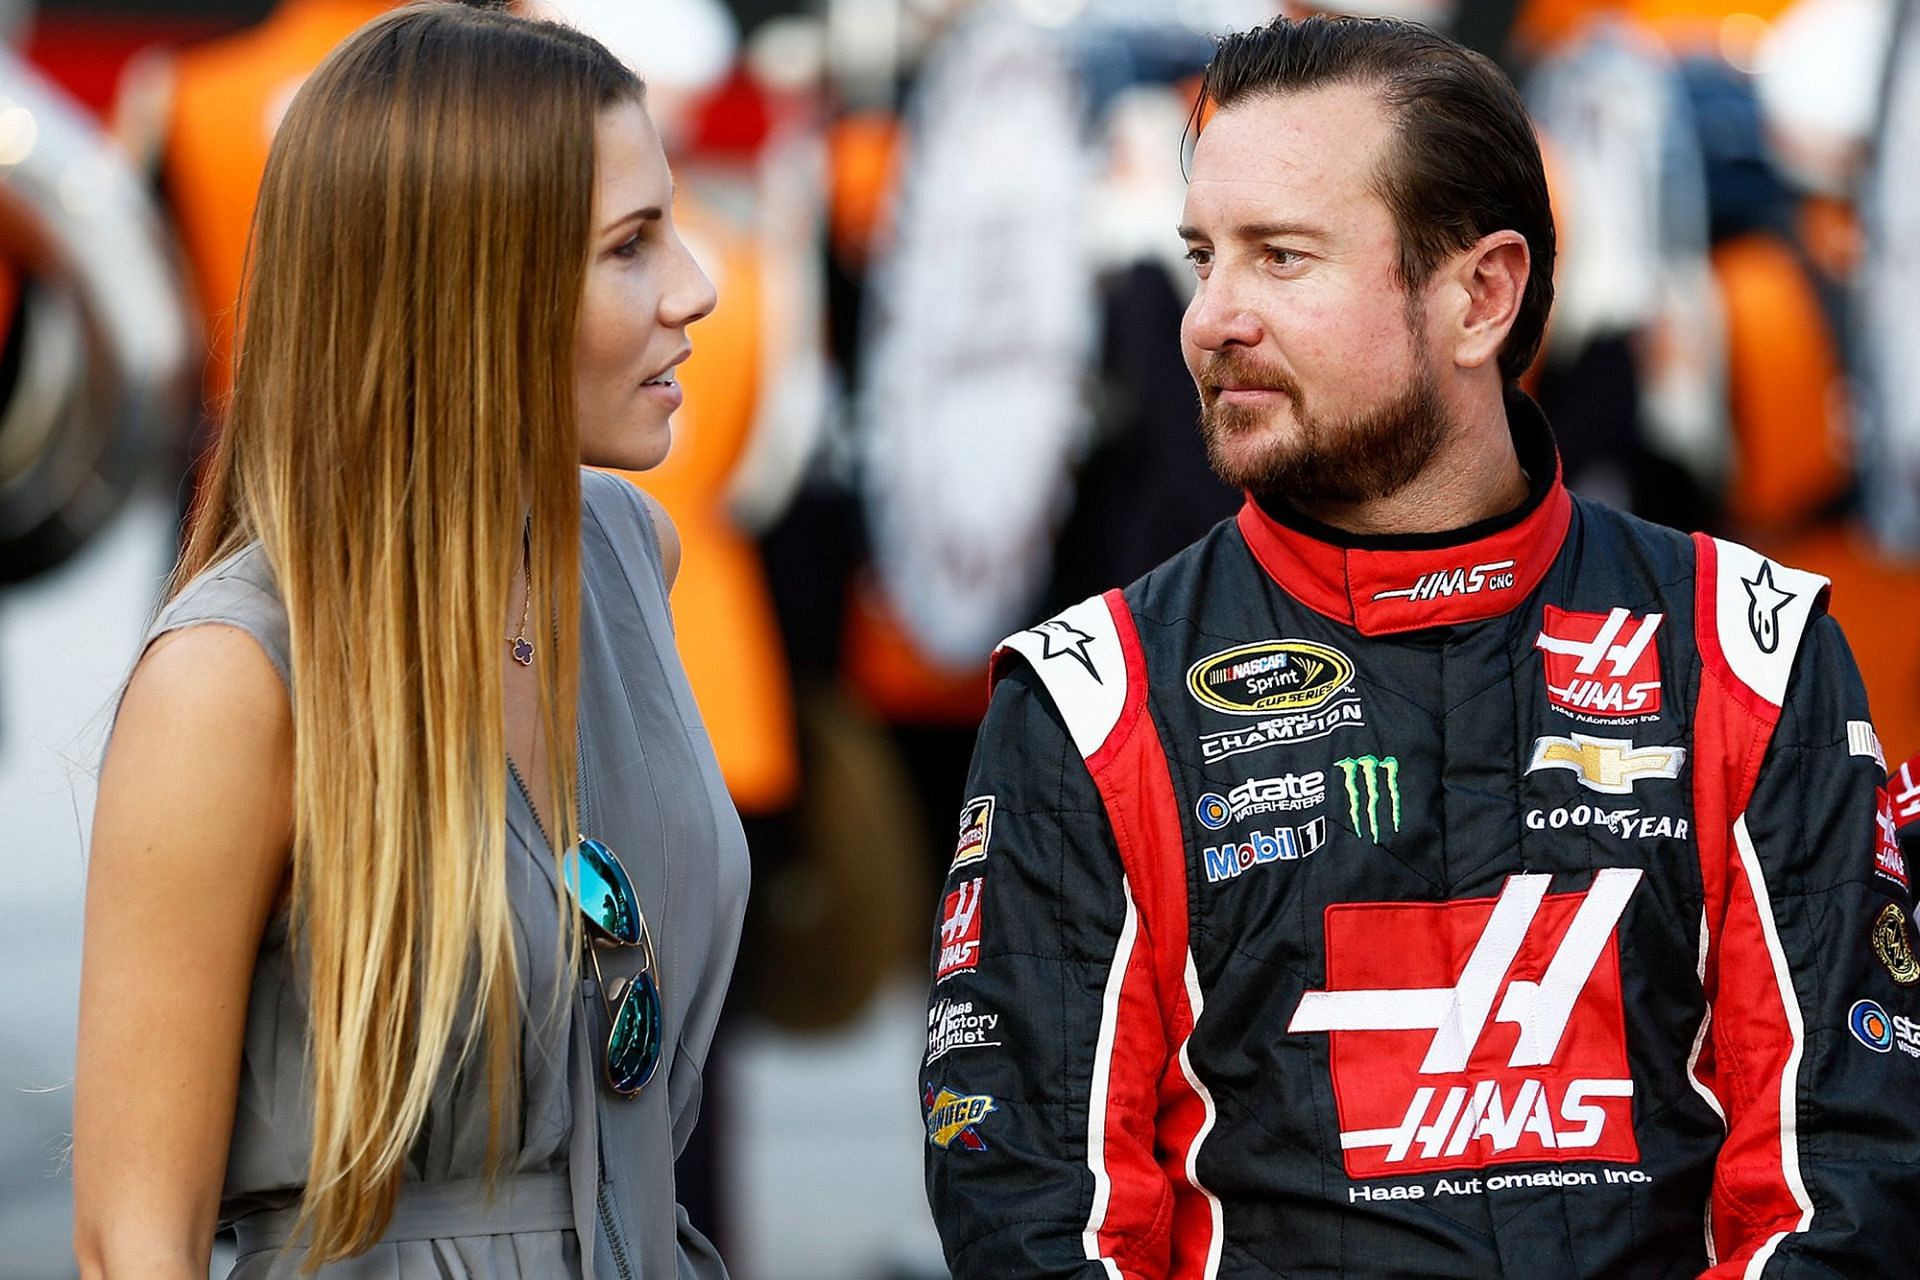 (L-R) Former competitive Polo player Ashley Van Metre with NASCAR Cup Series driver and ex-husband Kurt Busch. Picture Credits: Getty Images/The New York Post